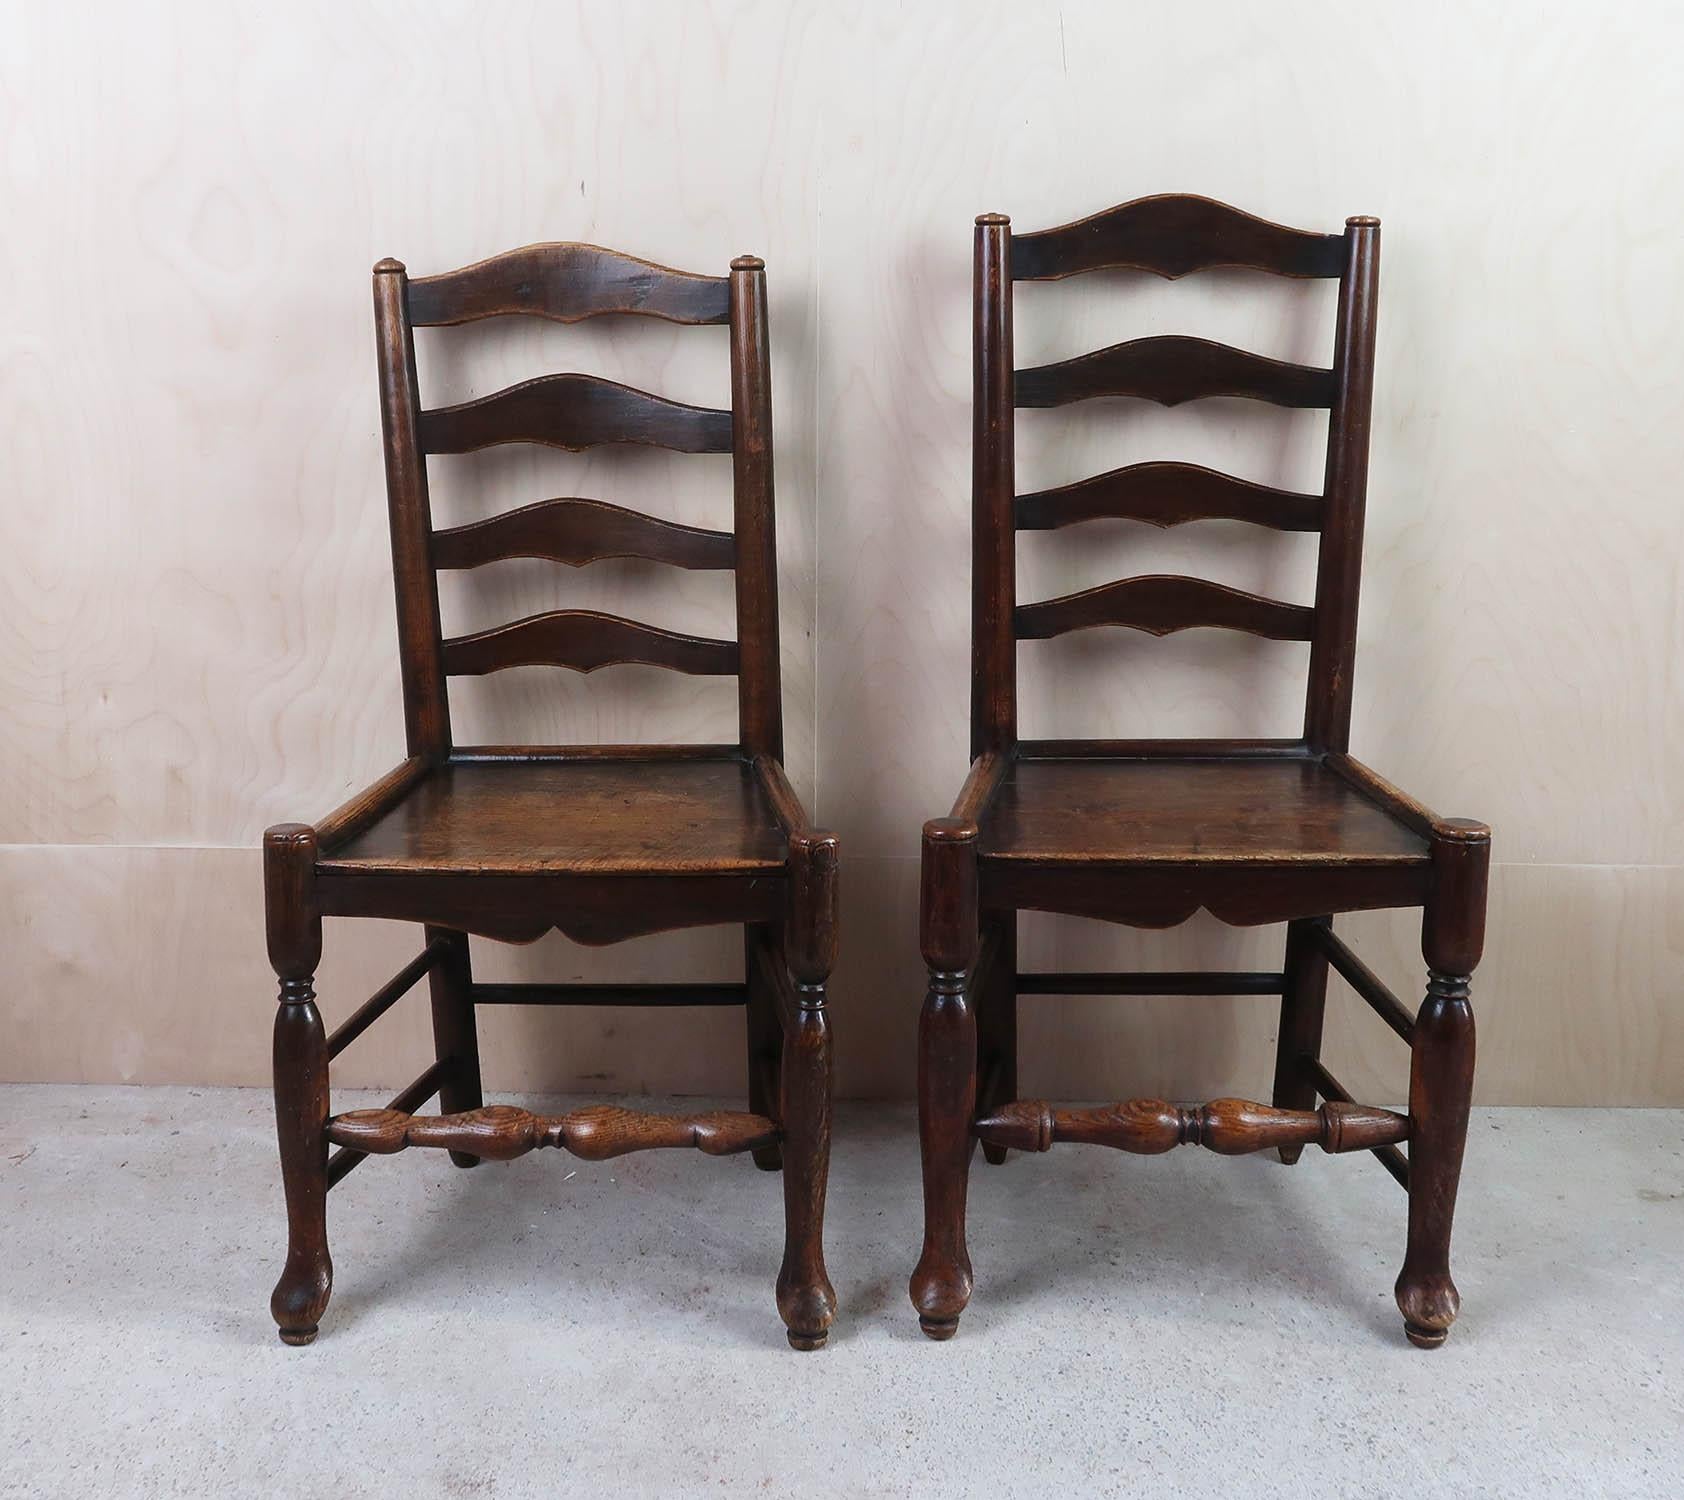 Fabulous near pair of elm ladder back chairs

One is slightly taller than the other

Lovely original patina and colour

Great in a Folk Art interior

Sturdy construction

The measurement relates to the taller of the chairs






